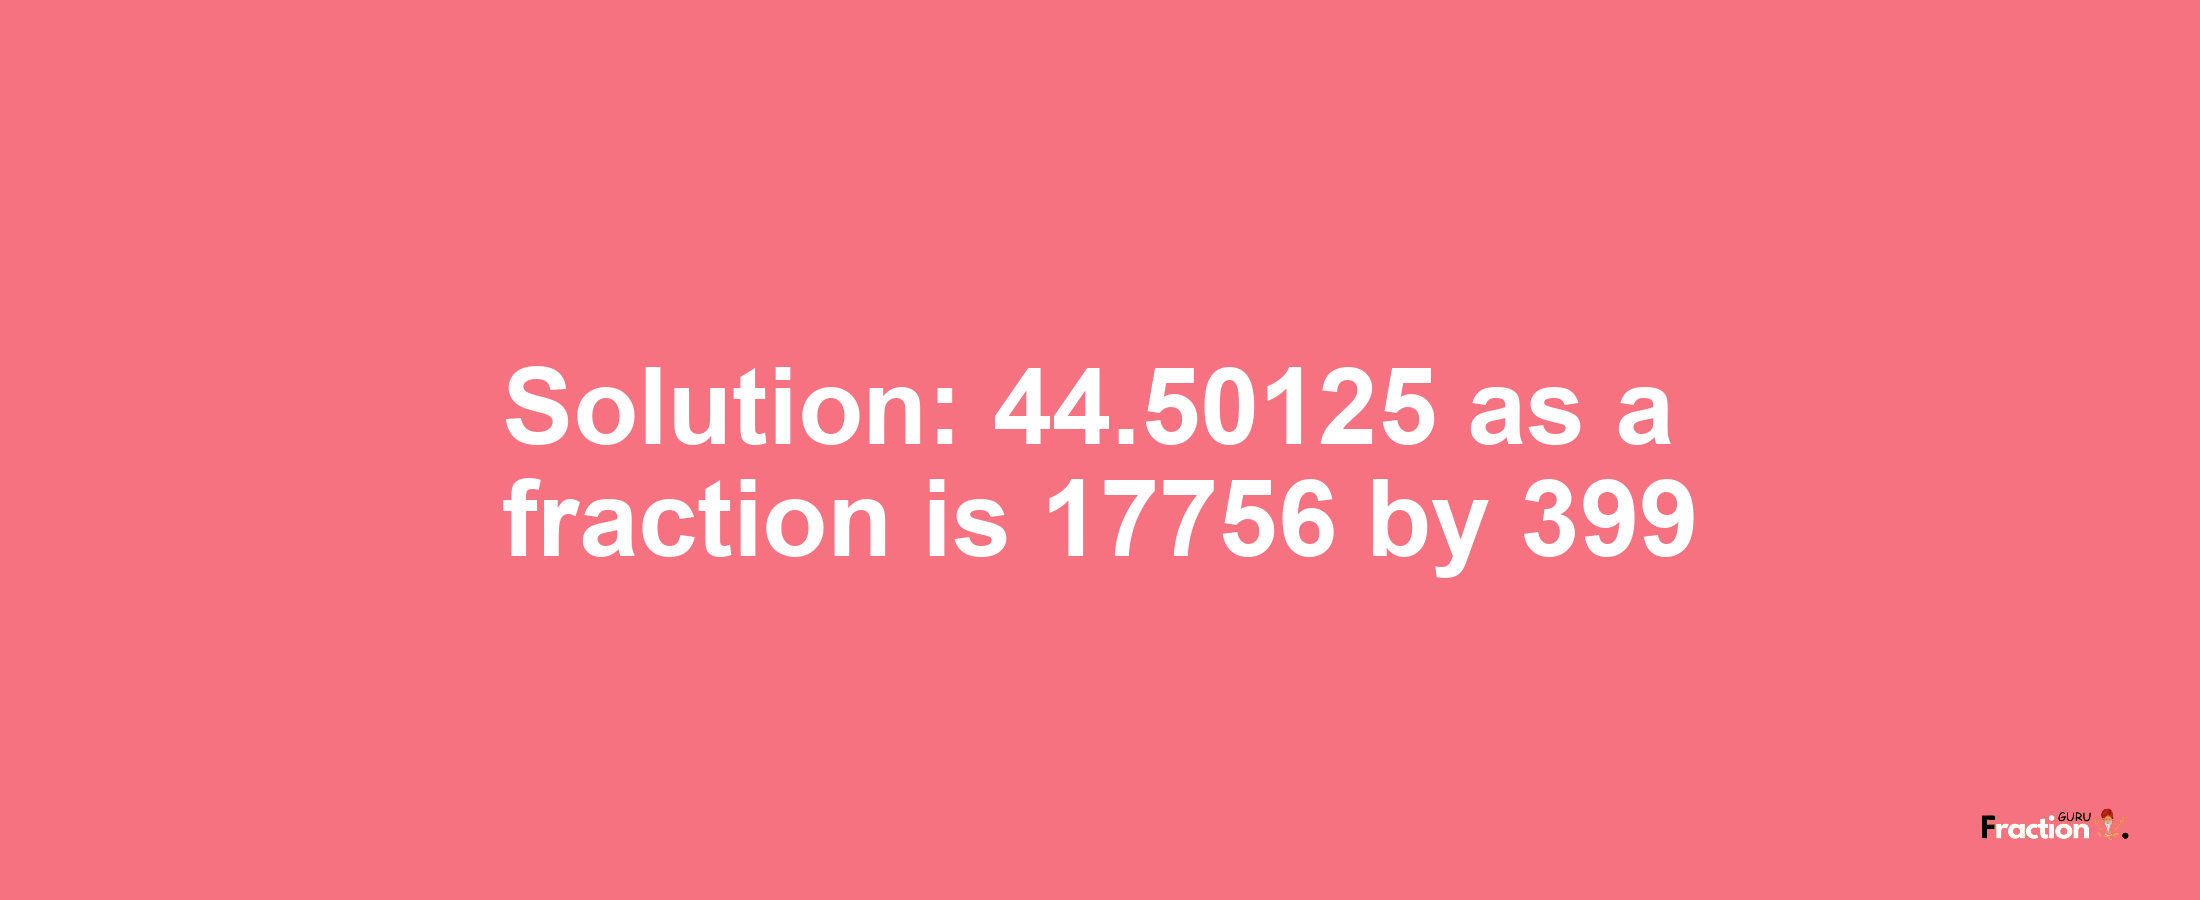 Solution:44.50125 as a fraction is 17756/399